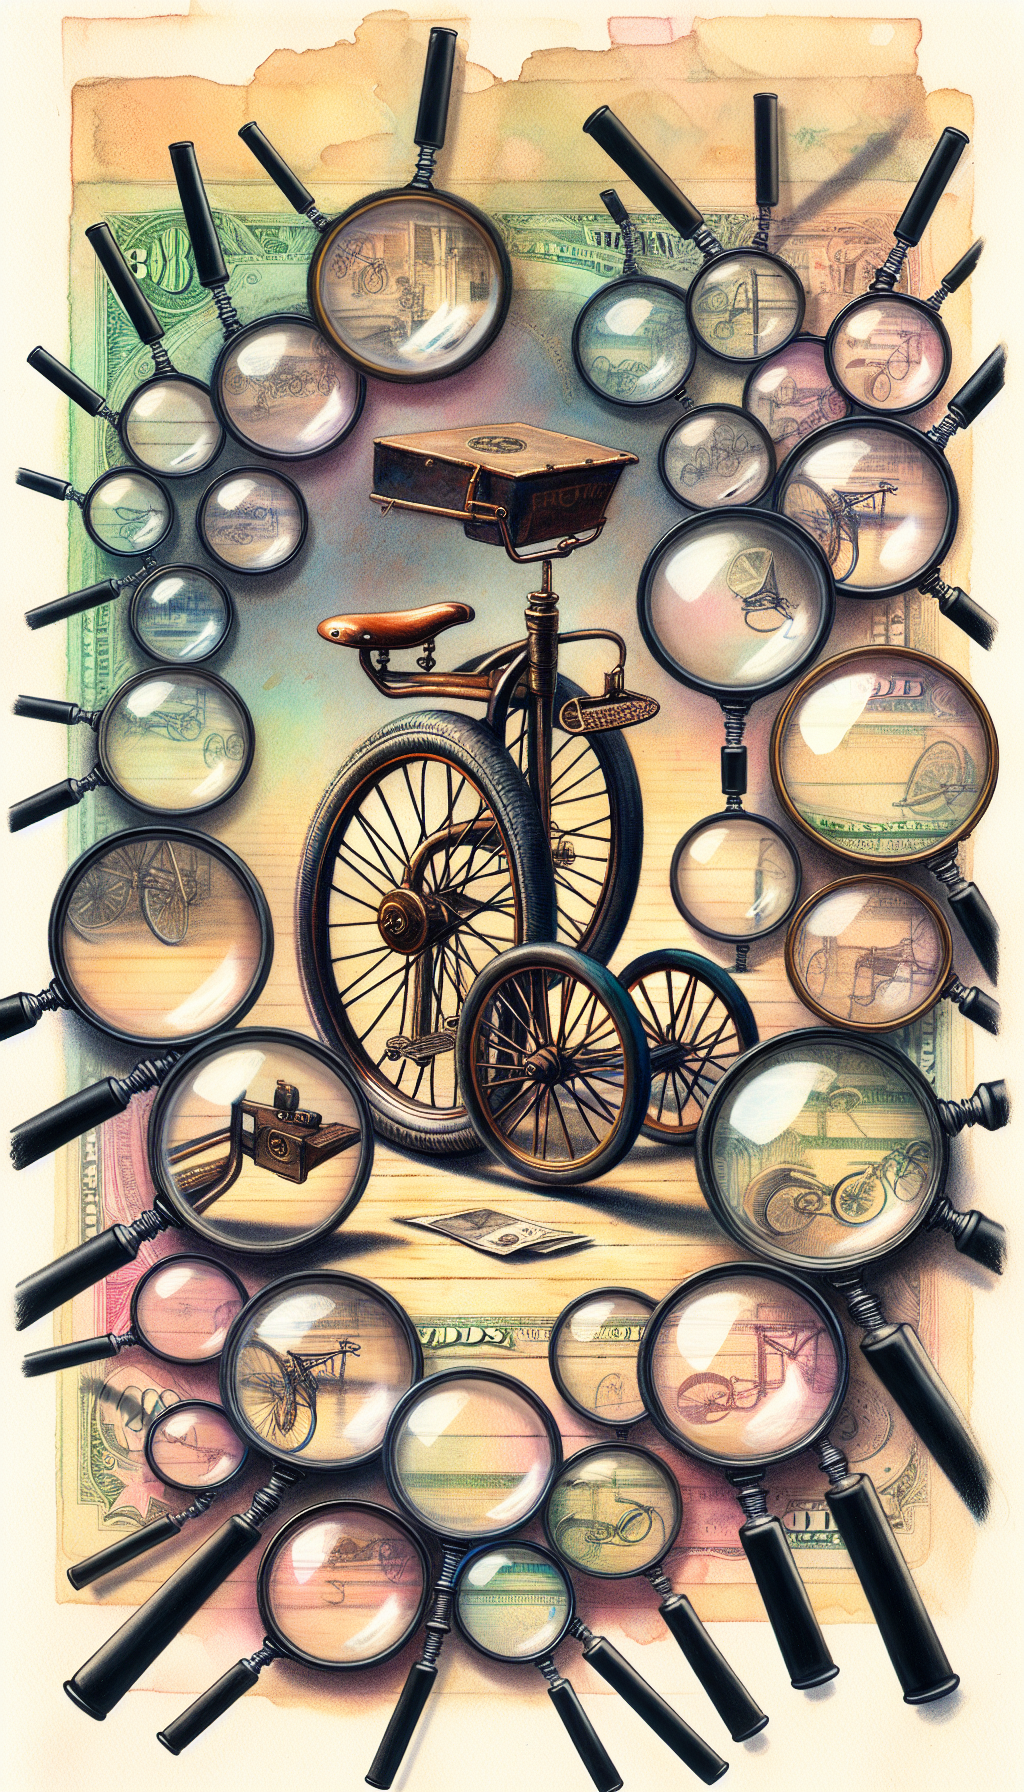 An elegantly aged tricycle stands surrounded by magnifying glasses, each lens focusing on different parts such as the patina-finished pedals, the intricate spoke design, and the vintage logo, symbolizing careful evaluation. A gleaming price tag dangles from the handlebar, with a question mark indicating the assessed value, while in the background, a soft watercolor collage of currency bills hints at the tricycle's antique worth.